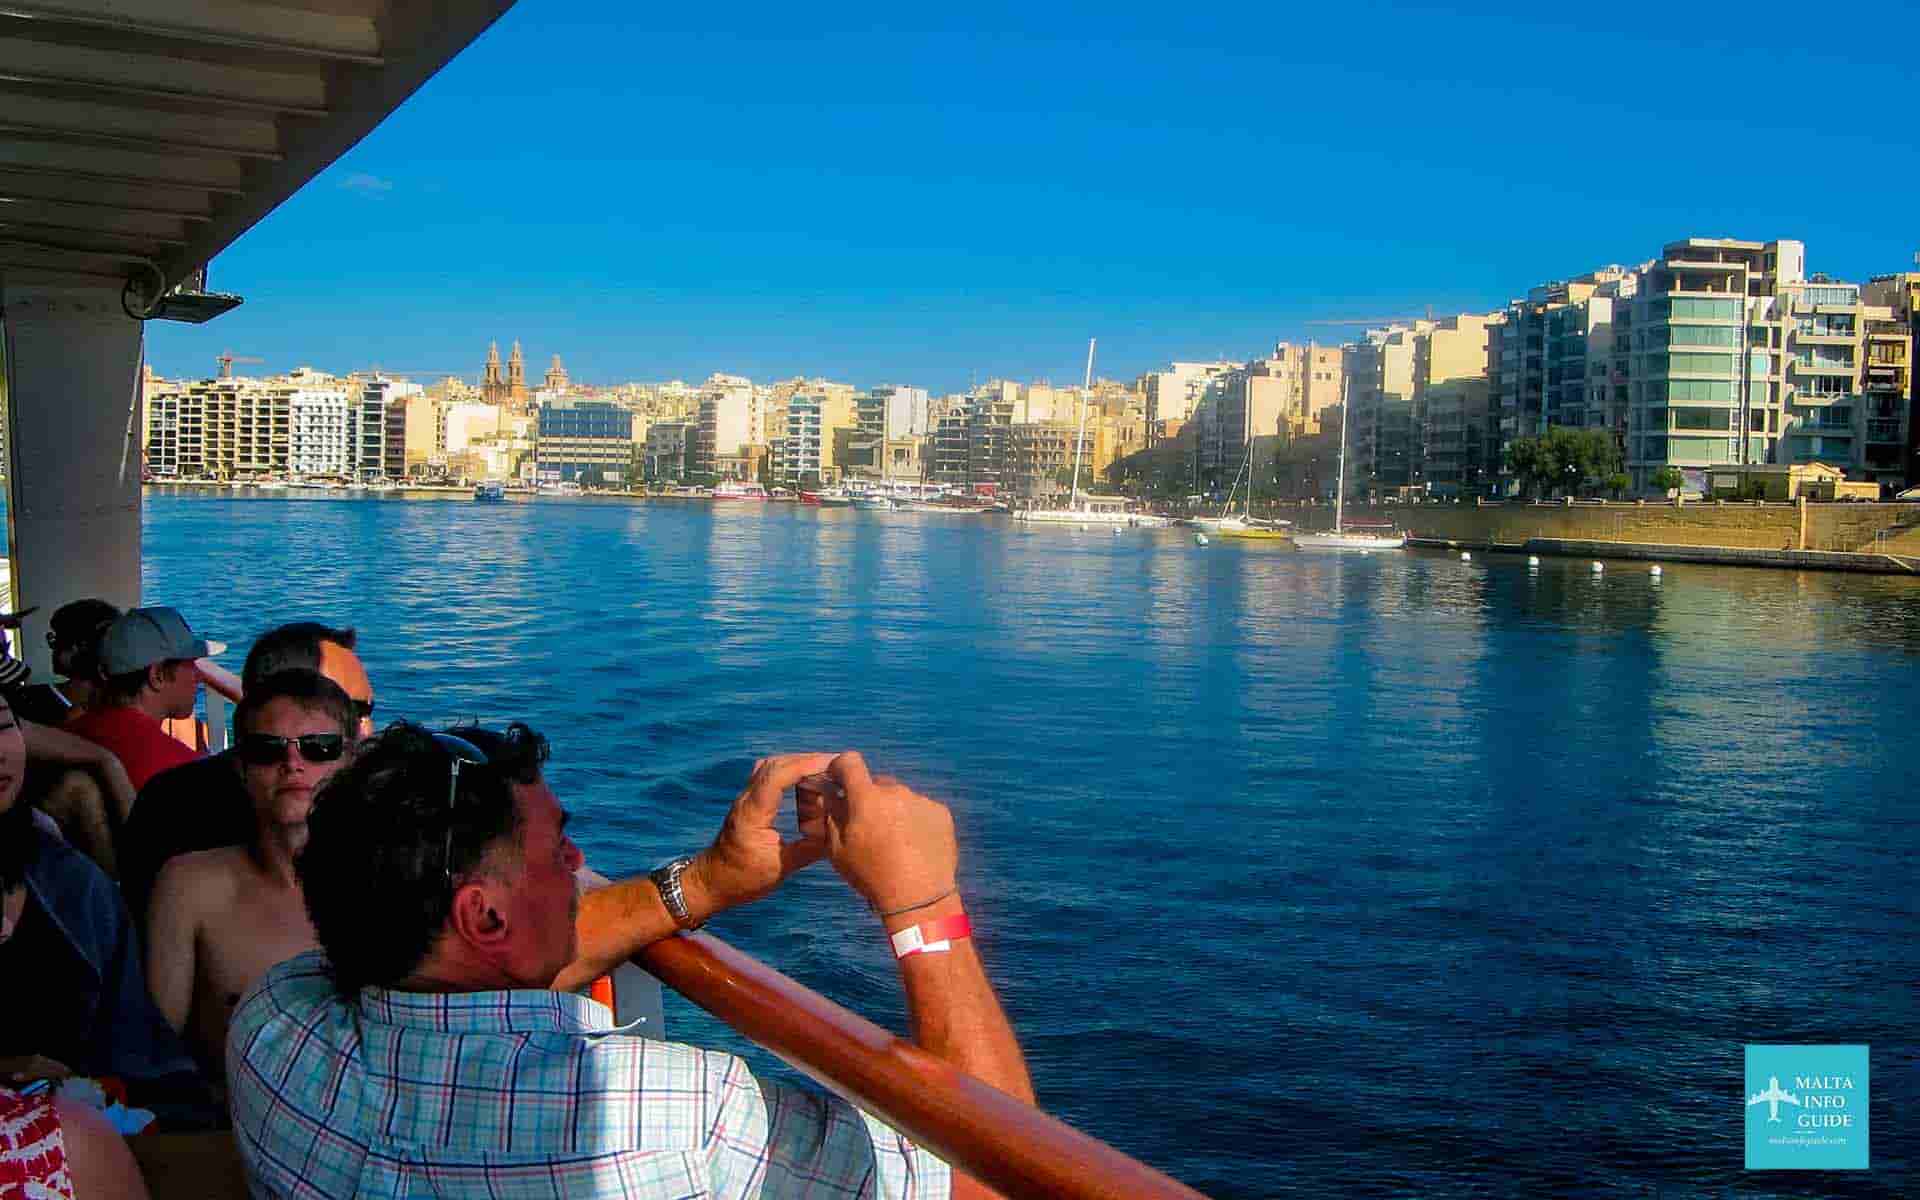 A view of Sliema and Gzira from the cruise boat on the Blue Lagoon Malta cruise.